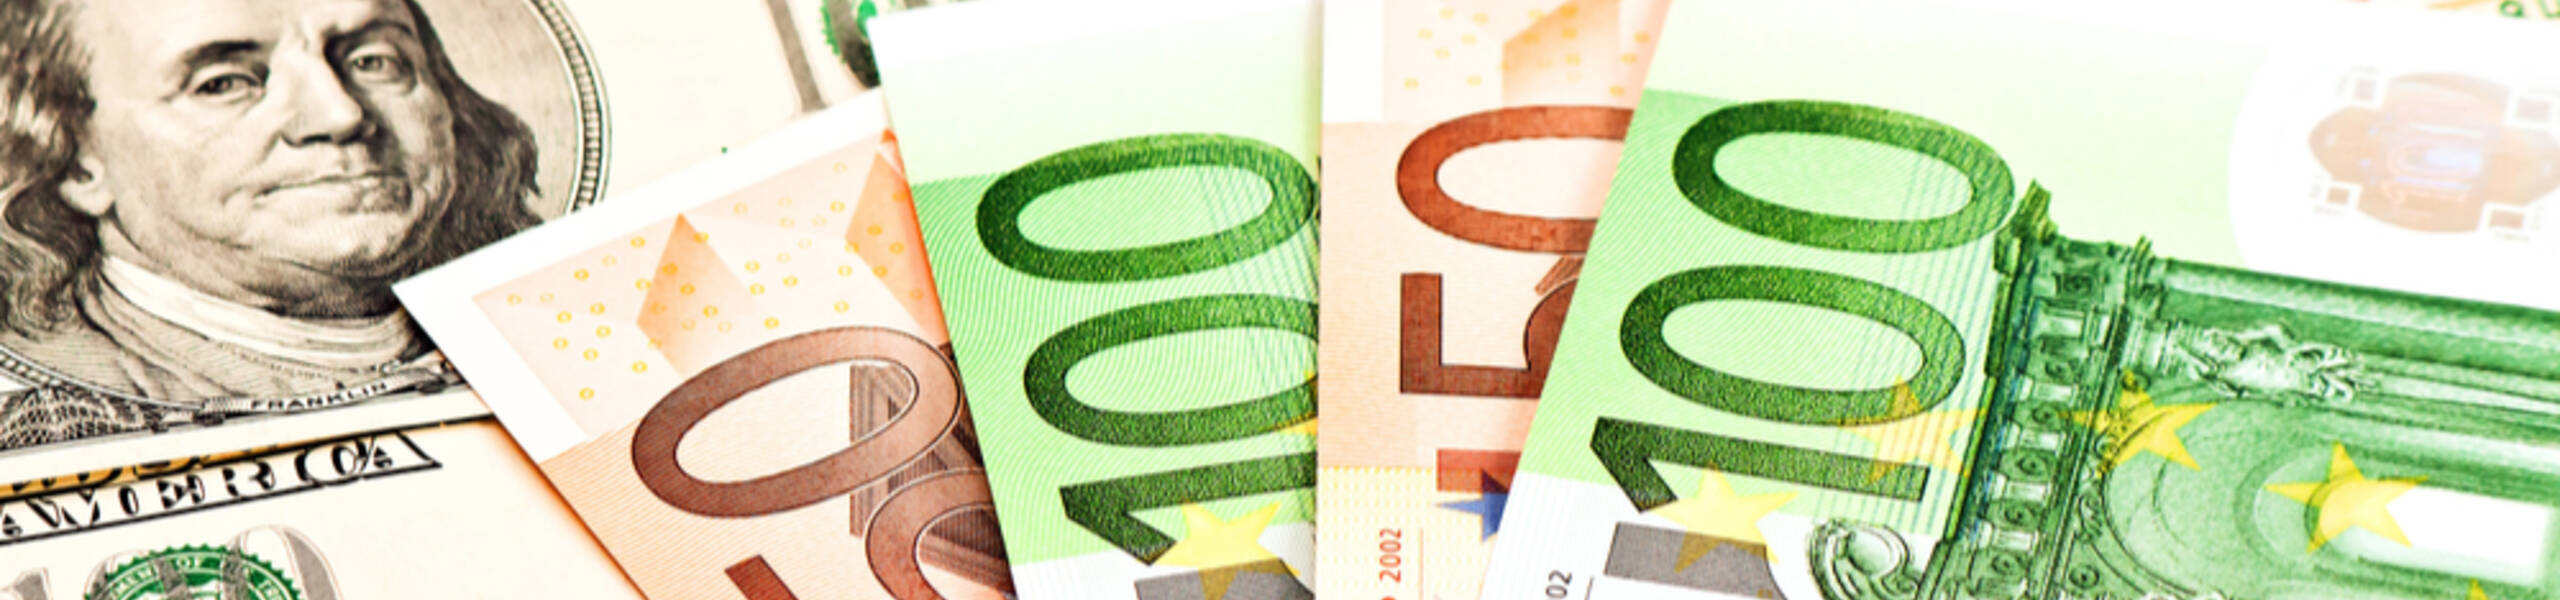 EUR/USD: how to trade the ECB meeting